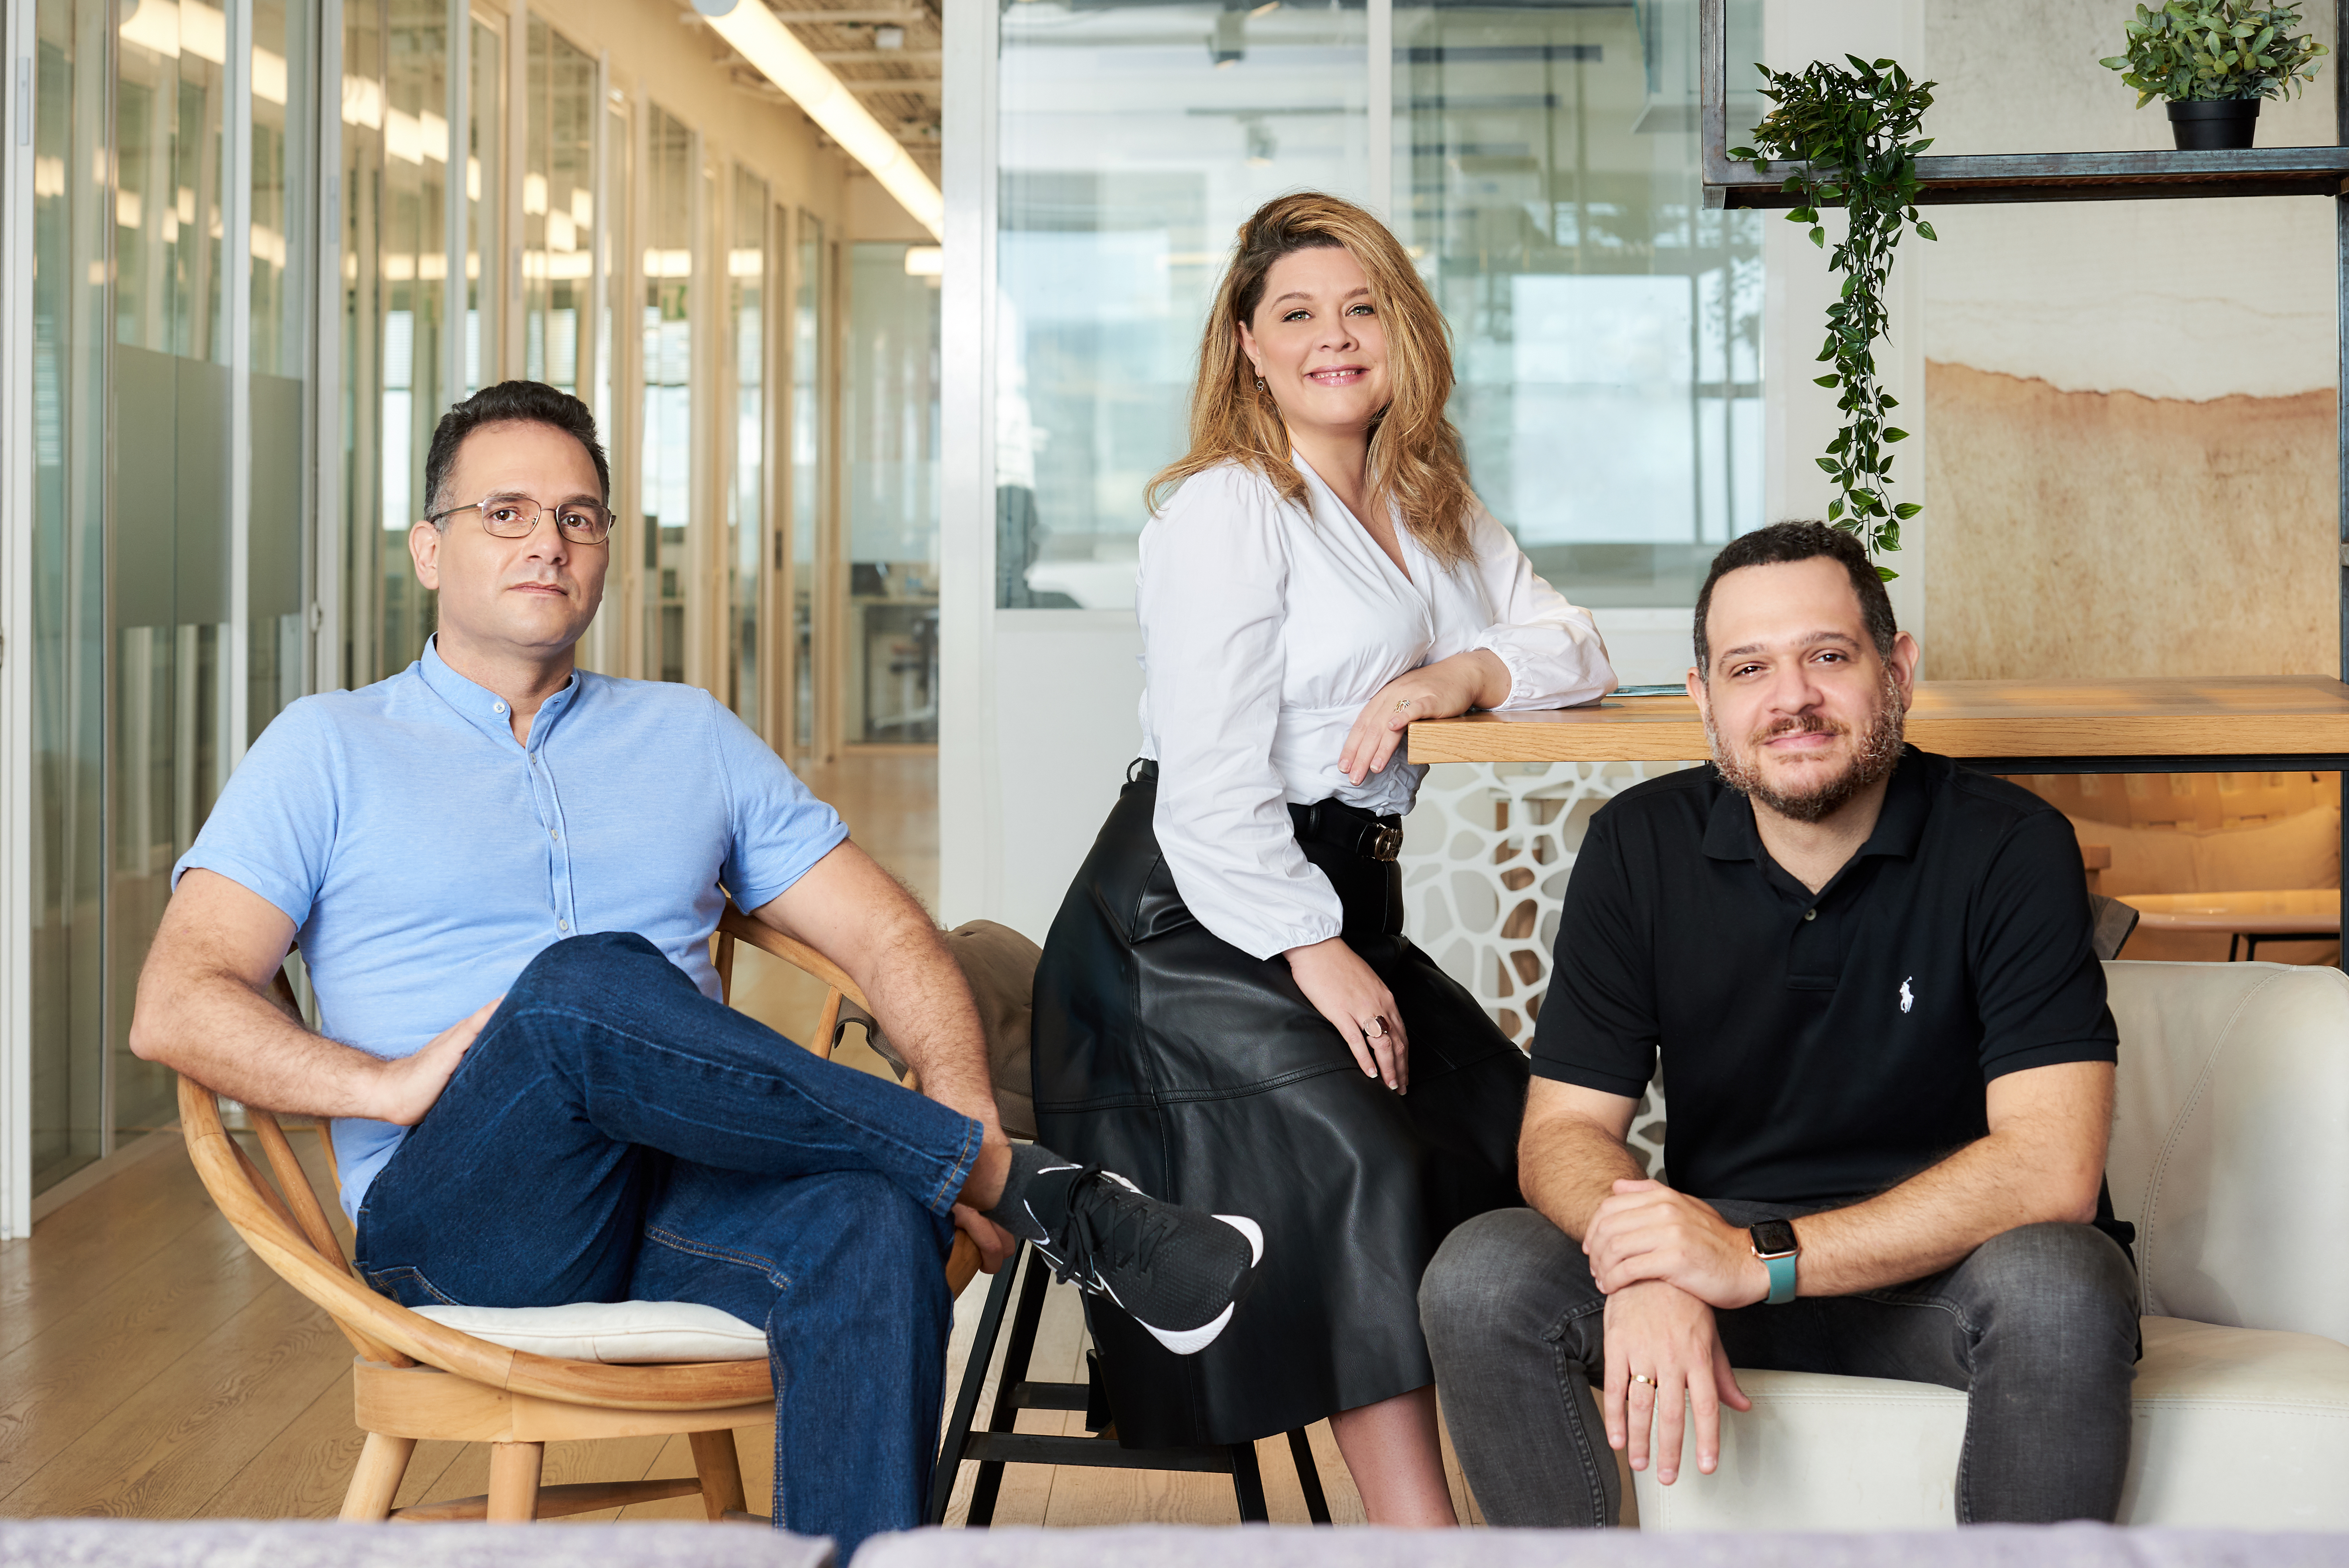 Syte’s cofounders, chief executive Ofer Freyman, chief revenue officer Lihi Pinto-Fryman and chief operating officer Idan Pinto